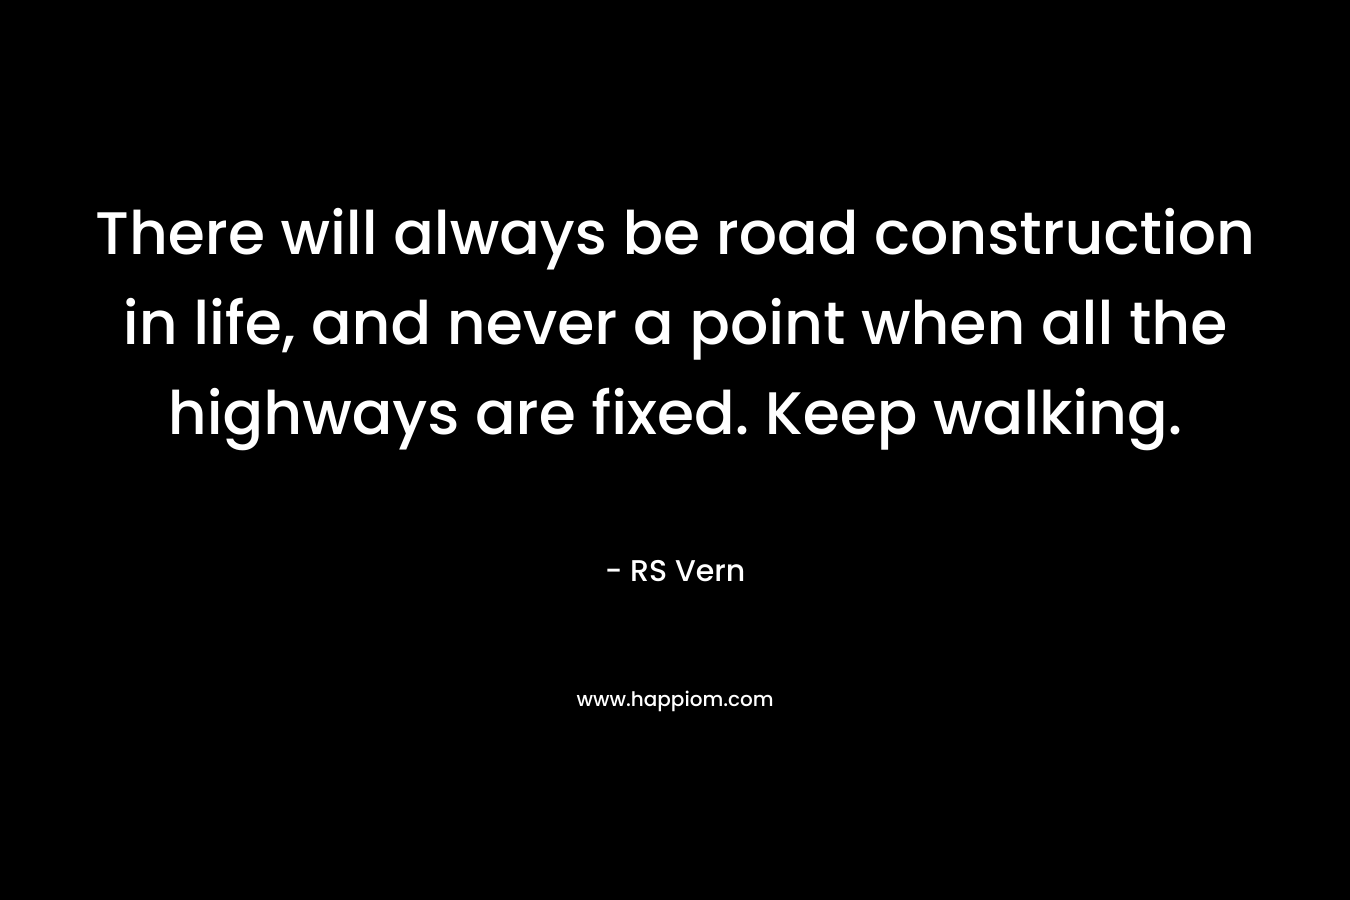 There will always be road construction in life, and never a point when all the highways are fixed. Keep walking. – RS Vern